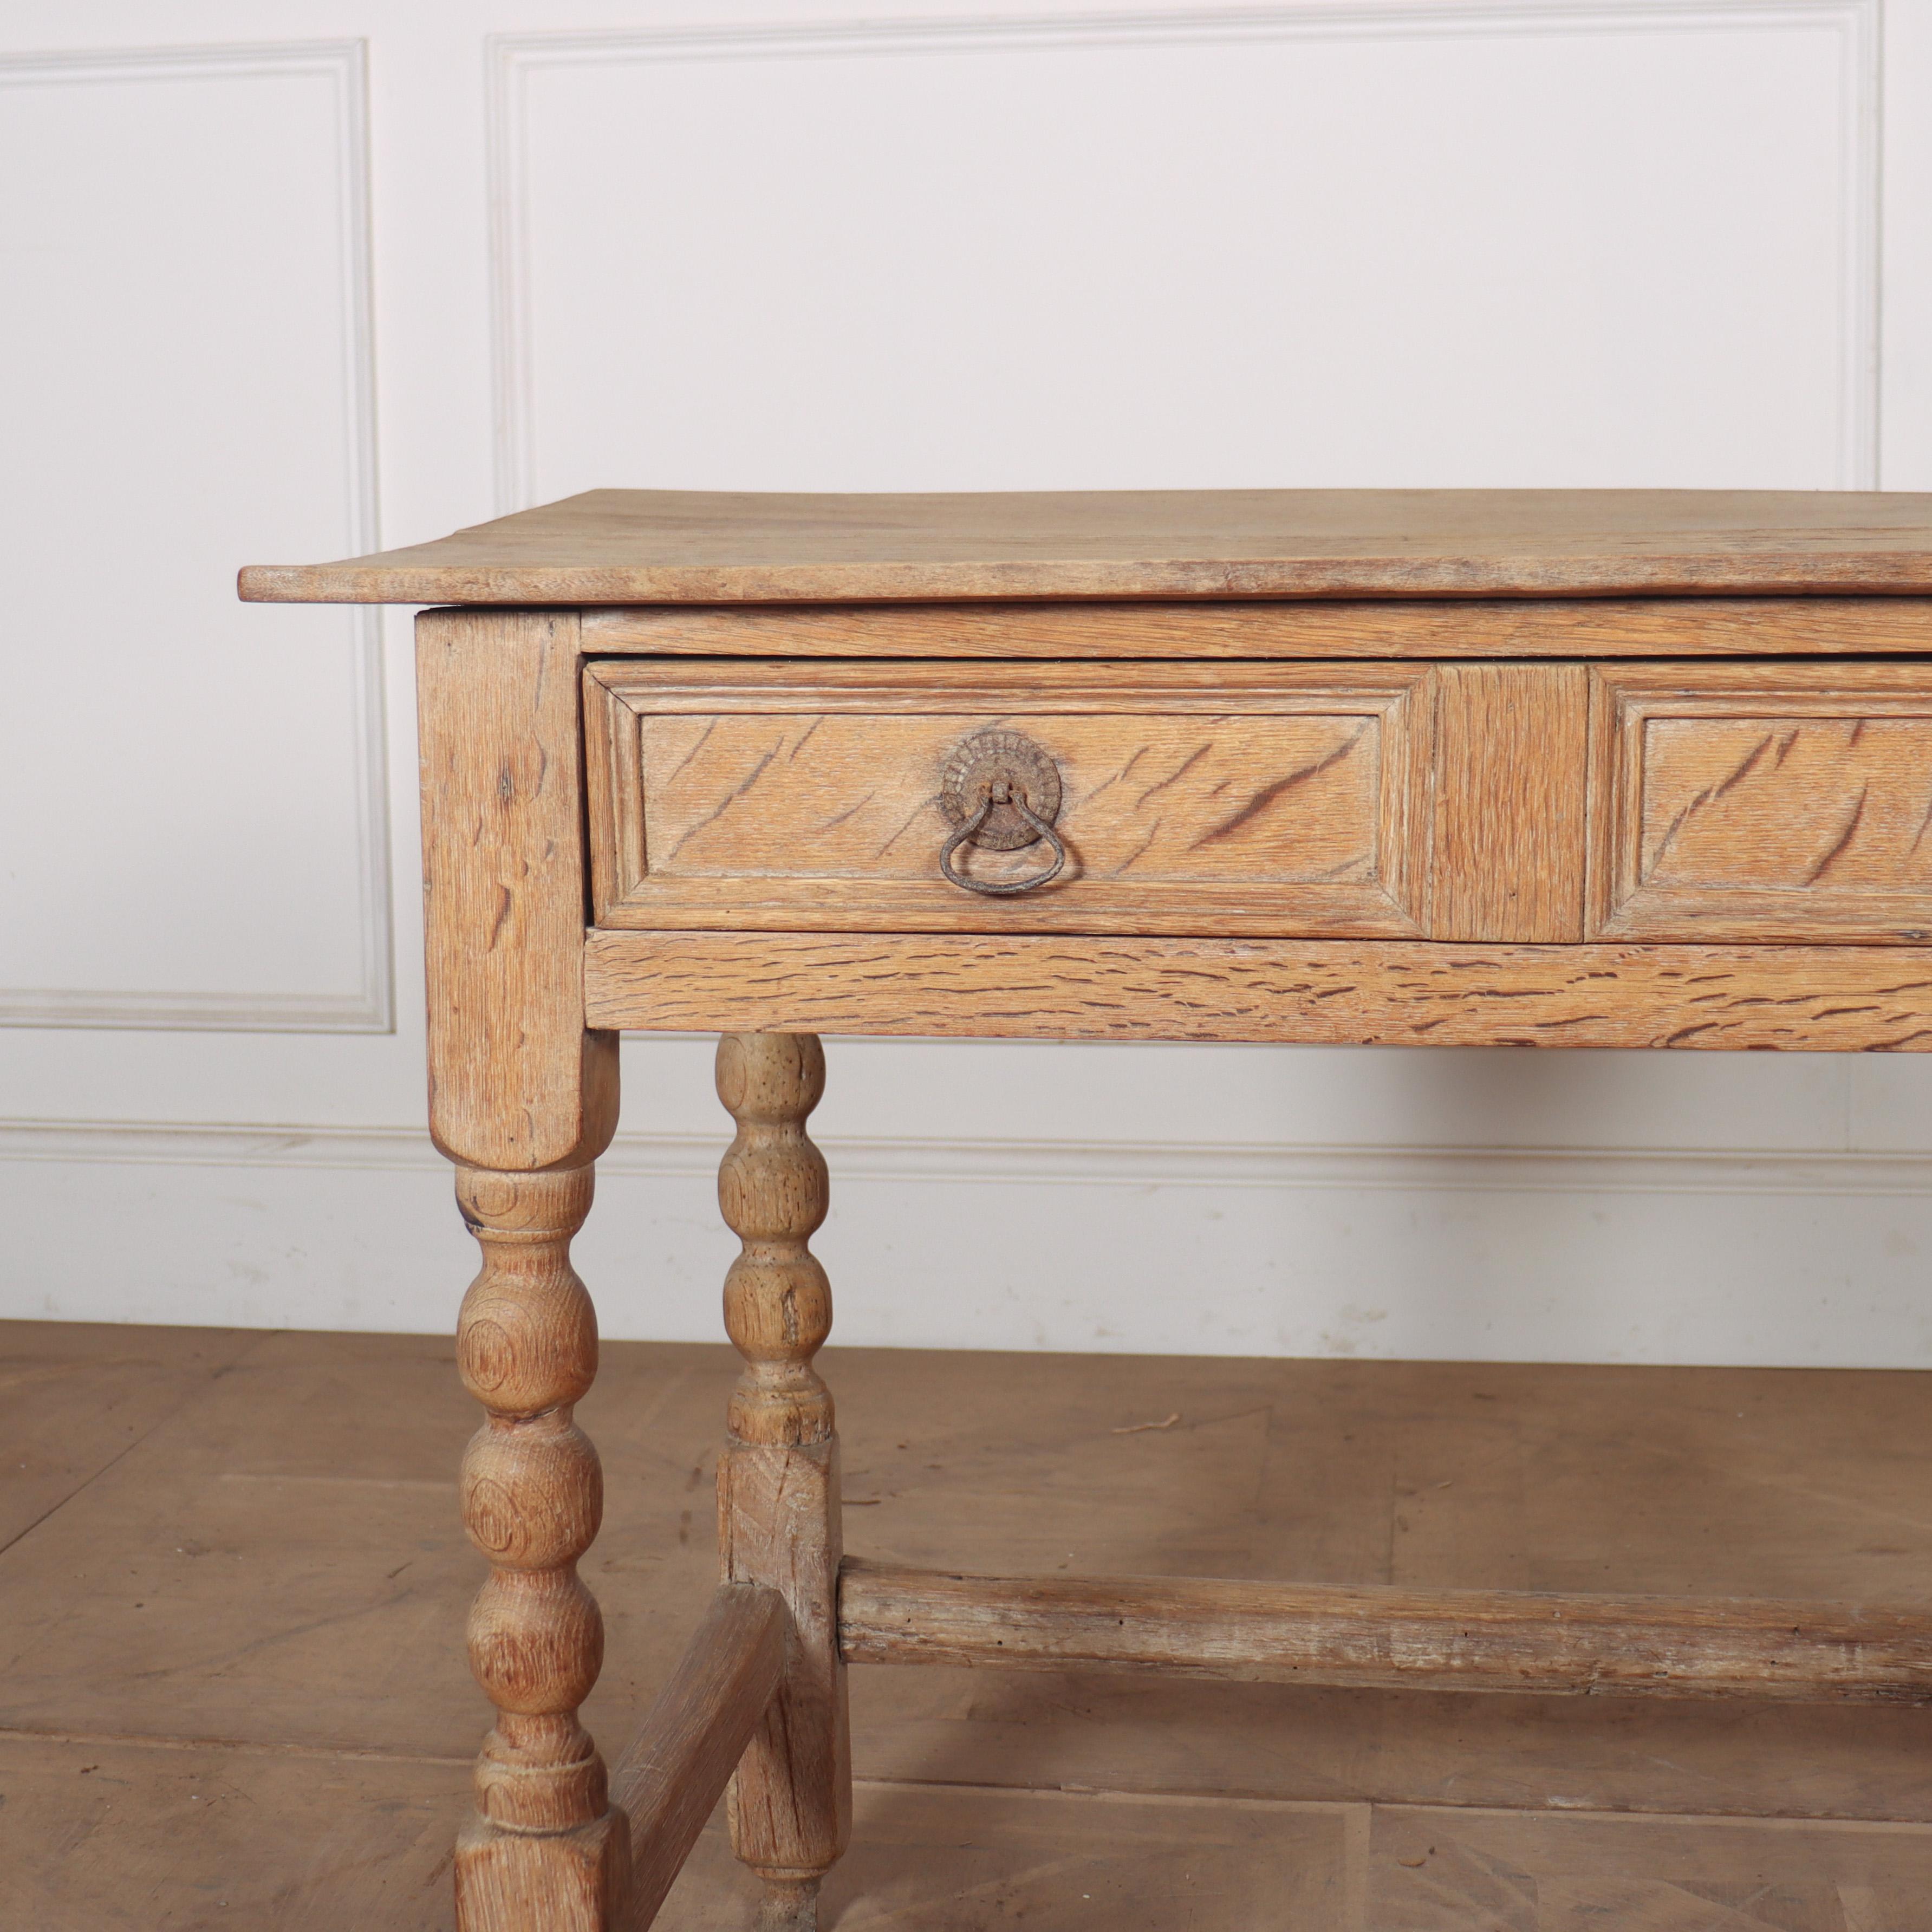 Early 18th C English bleached oak one drawer lamp table. 1730.

Reference: 8177

Dimensions
34 inches (86 cms) Wide
21.5 inches (55 cms) Deep
28 inches (71 cms) High